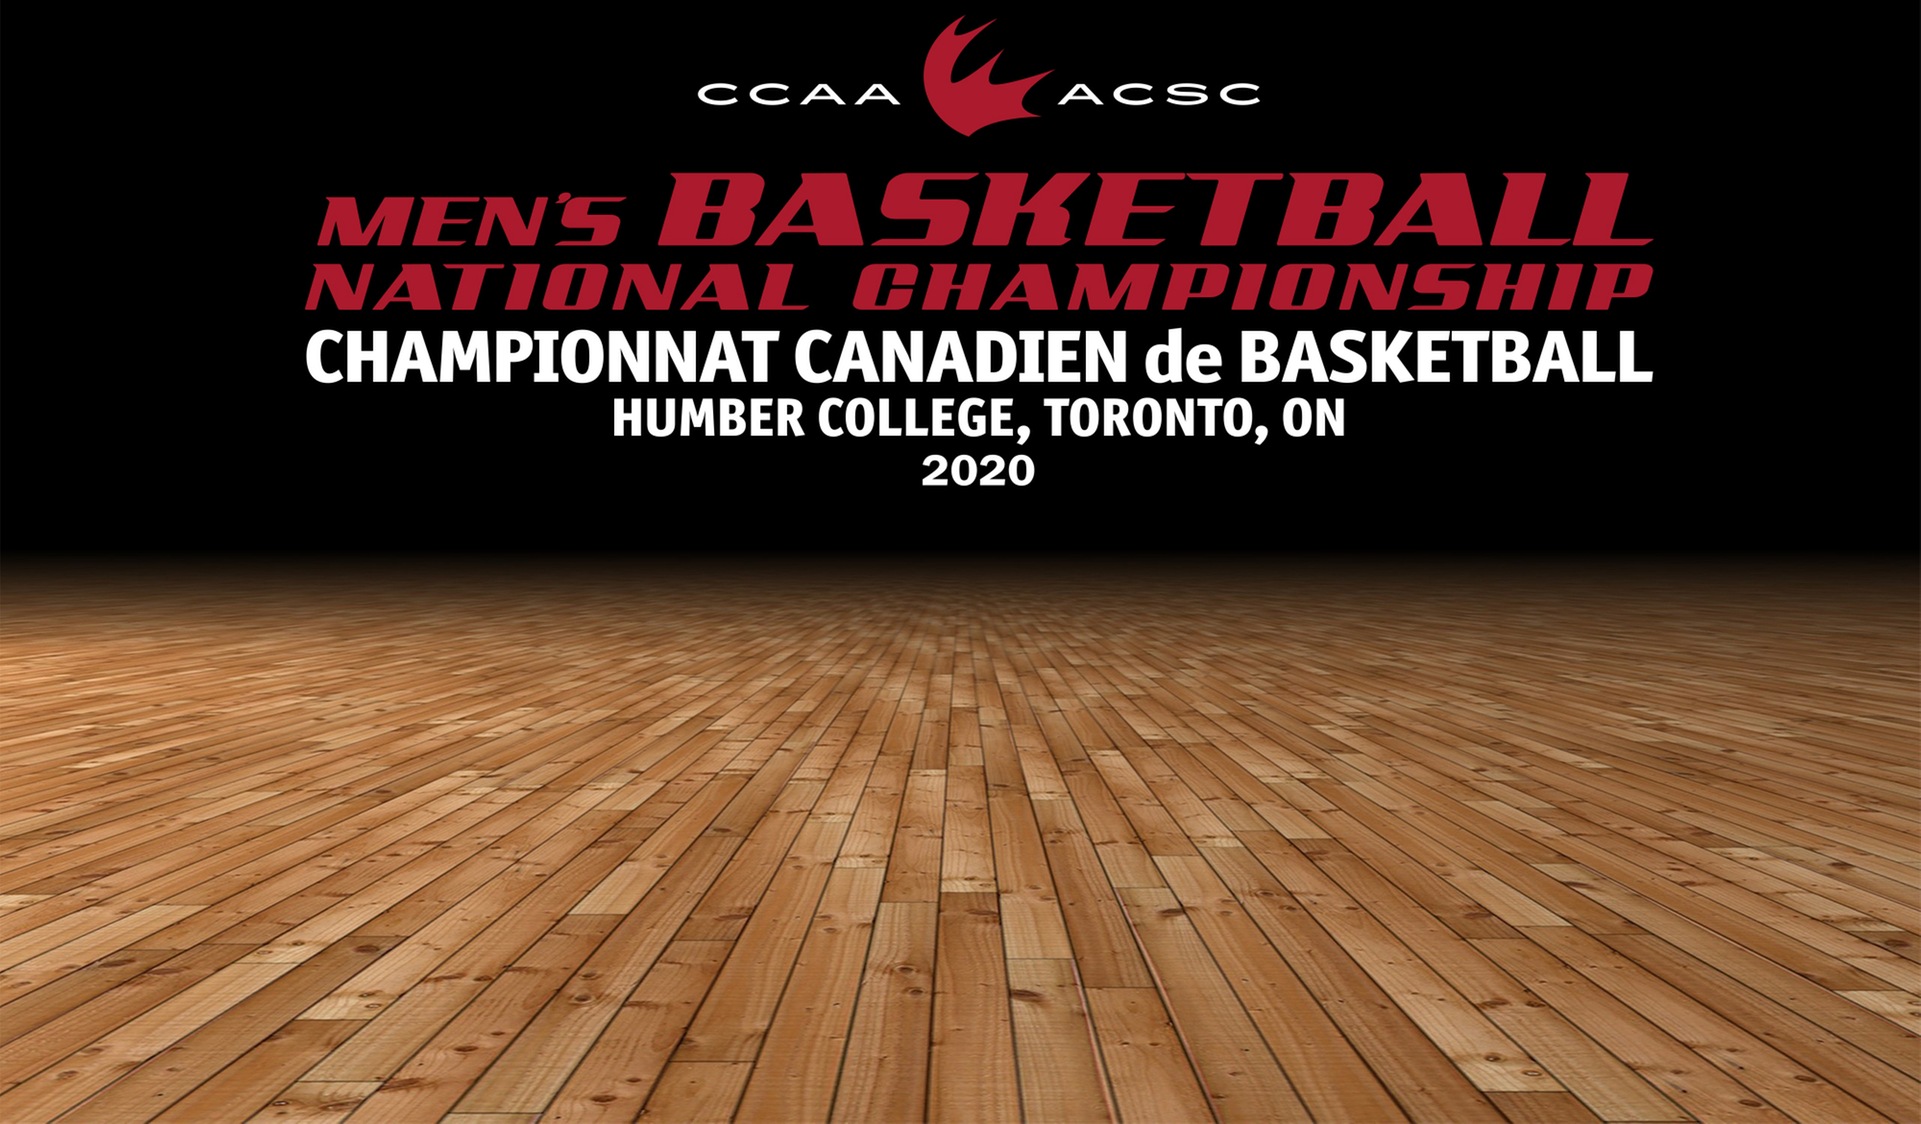 HUMBER WINS RIGHT TO BID FOR 2020 CCAA MEN'S NATIONAL BASKETBALL CHAMPIONSHIP